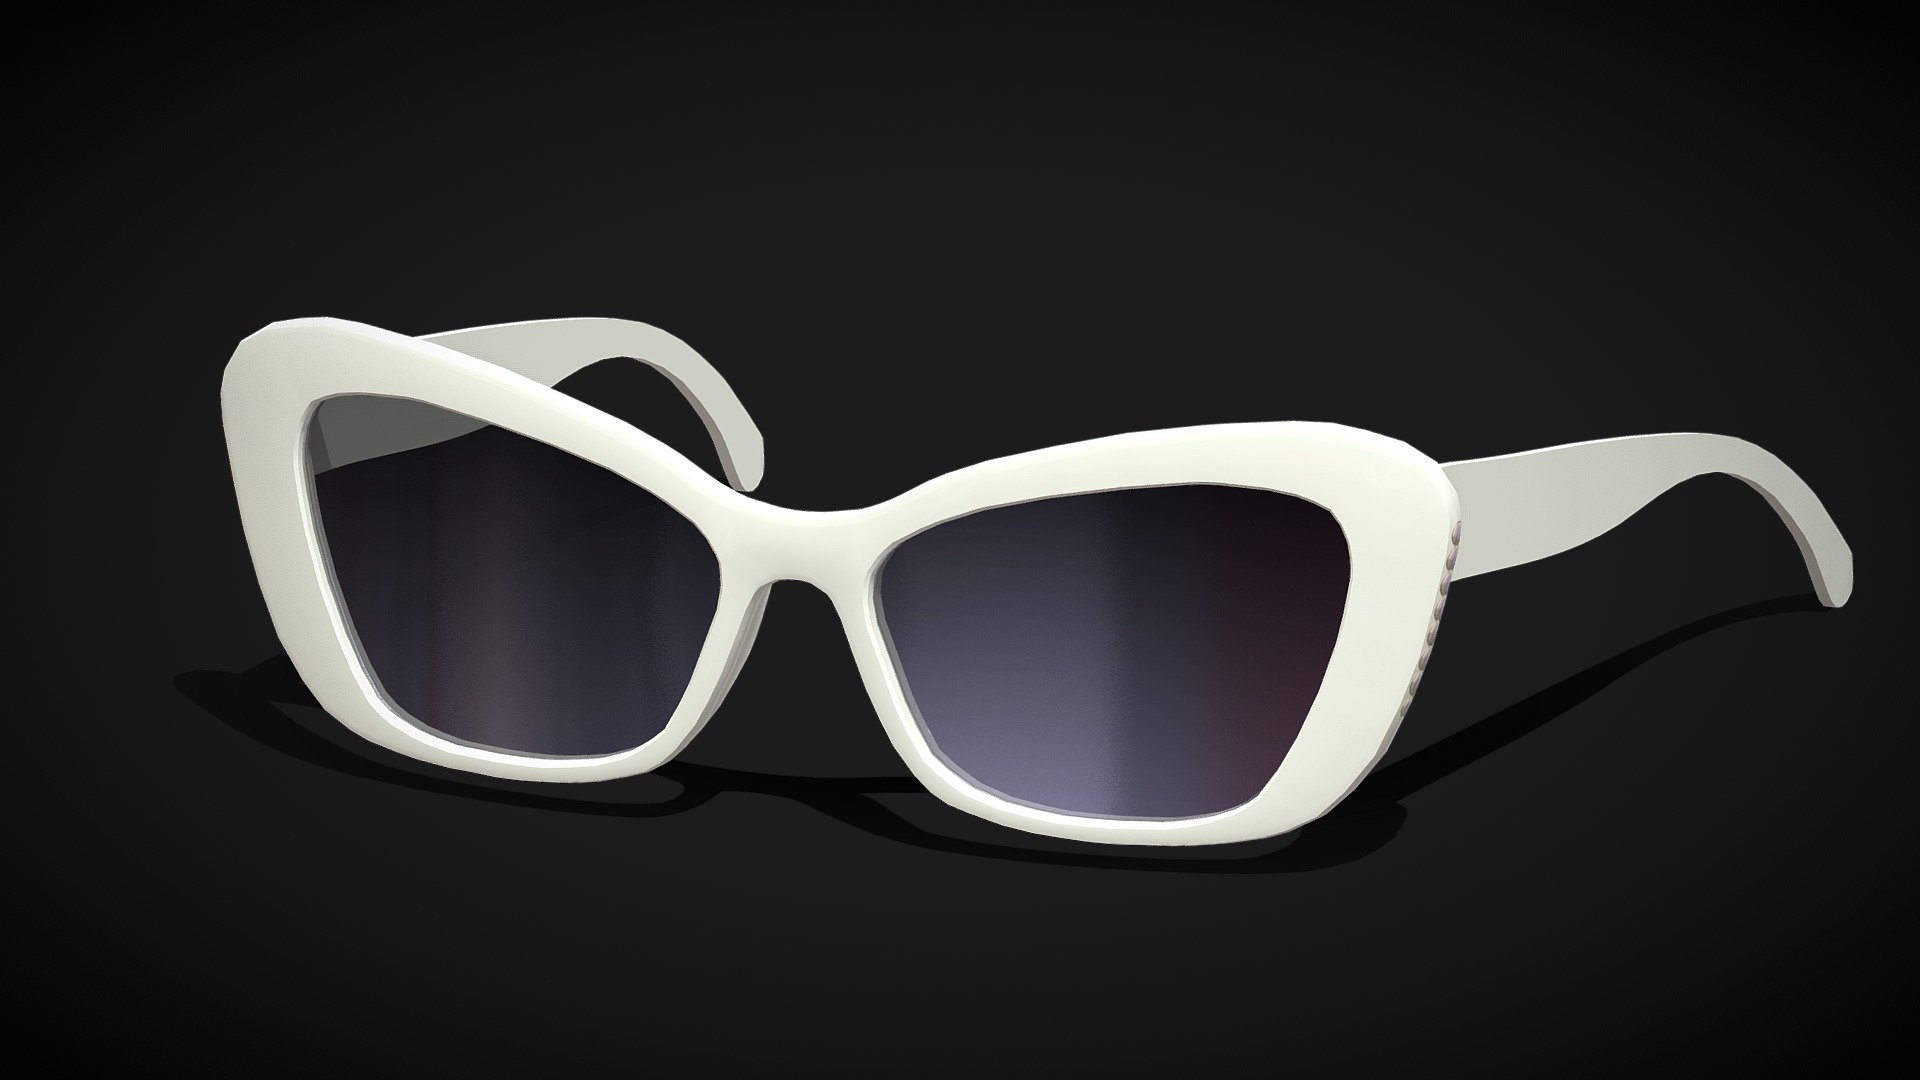 White Barbie Sunglasses -low poly

Triangles: 3k
Vertices: 1.6k

4096x4096 PNG texture - White Barbie Sunglasses -low poly - Buy Royalty Free 3D model by Karolina Renkiewicz (@KarolinaRenkiewicz) 3d model